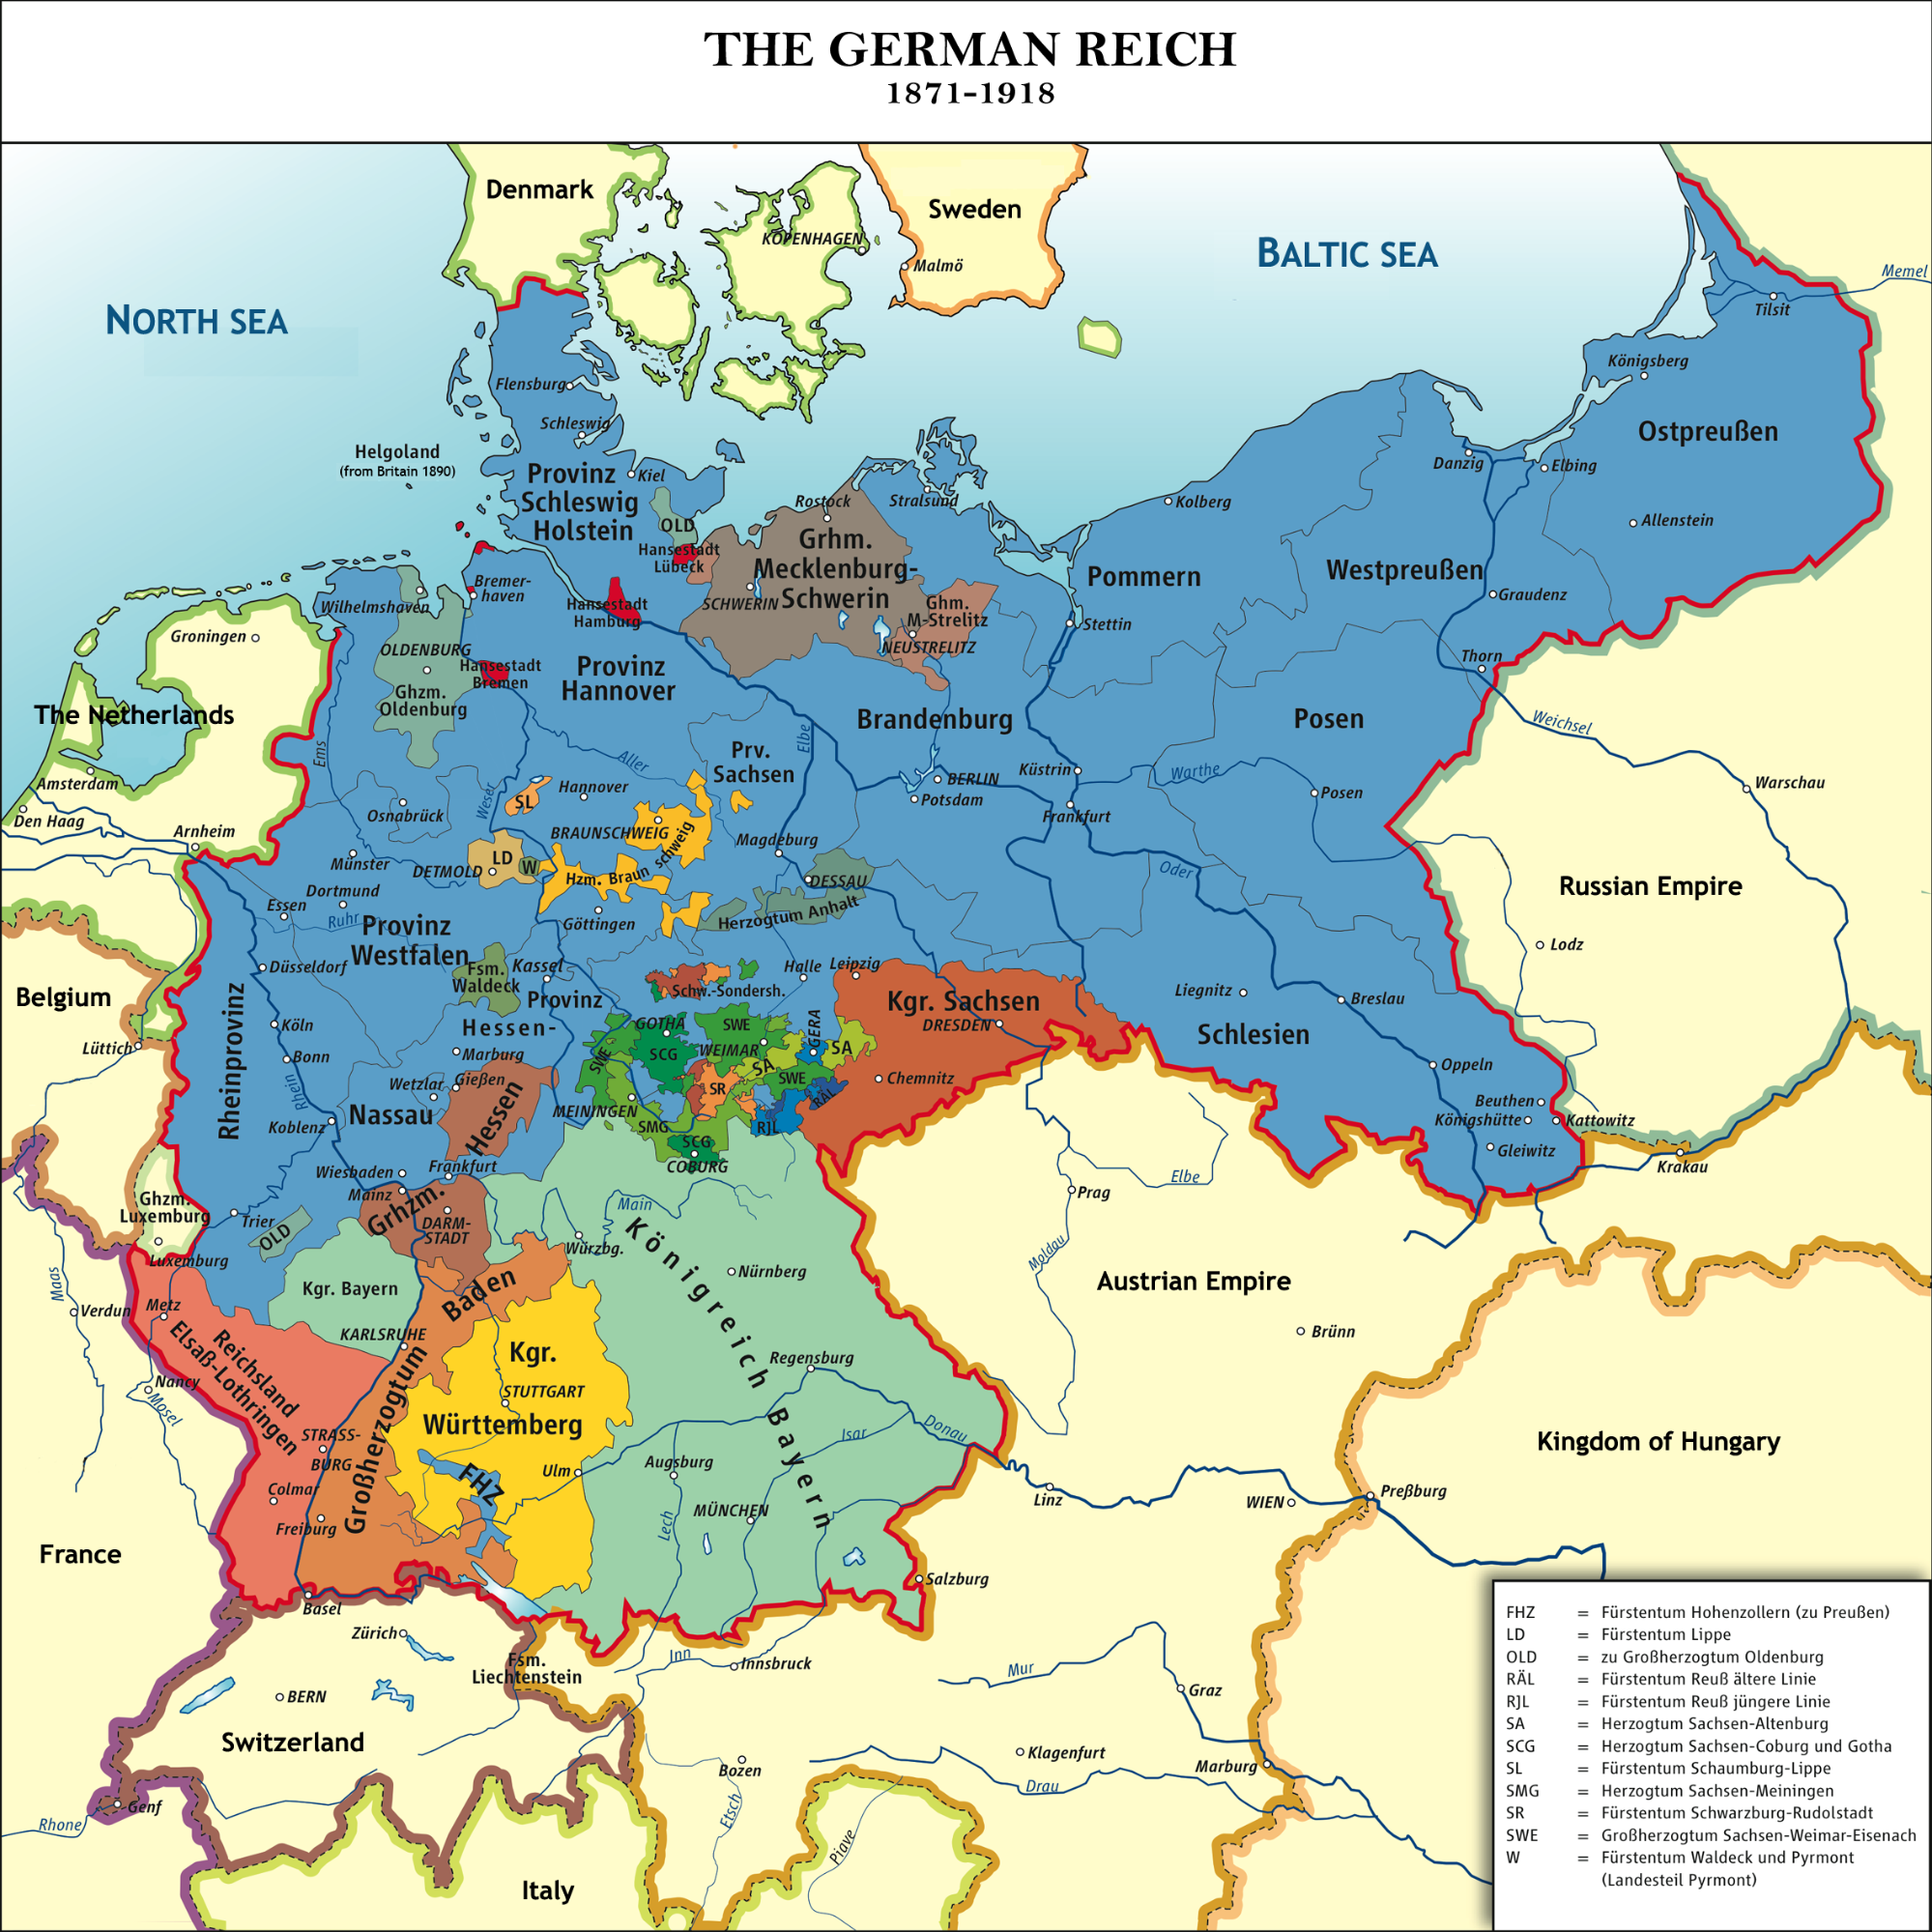 Map of Germany after unification.